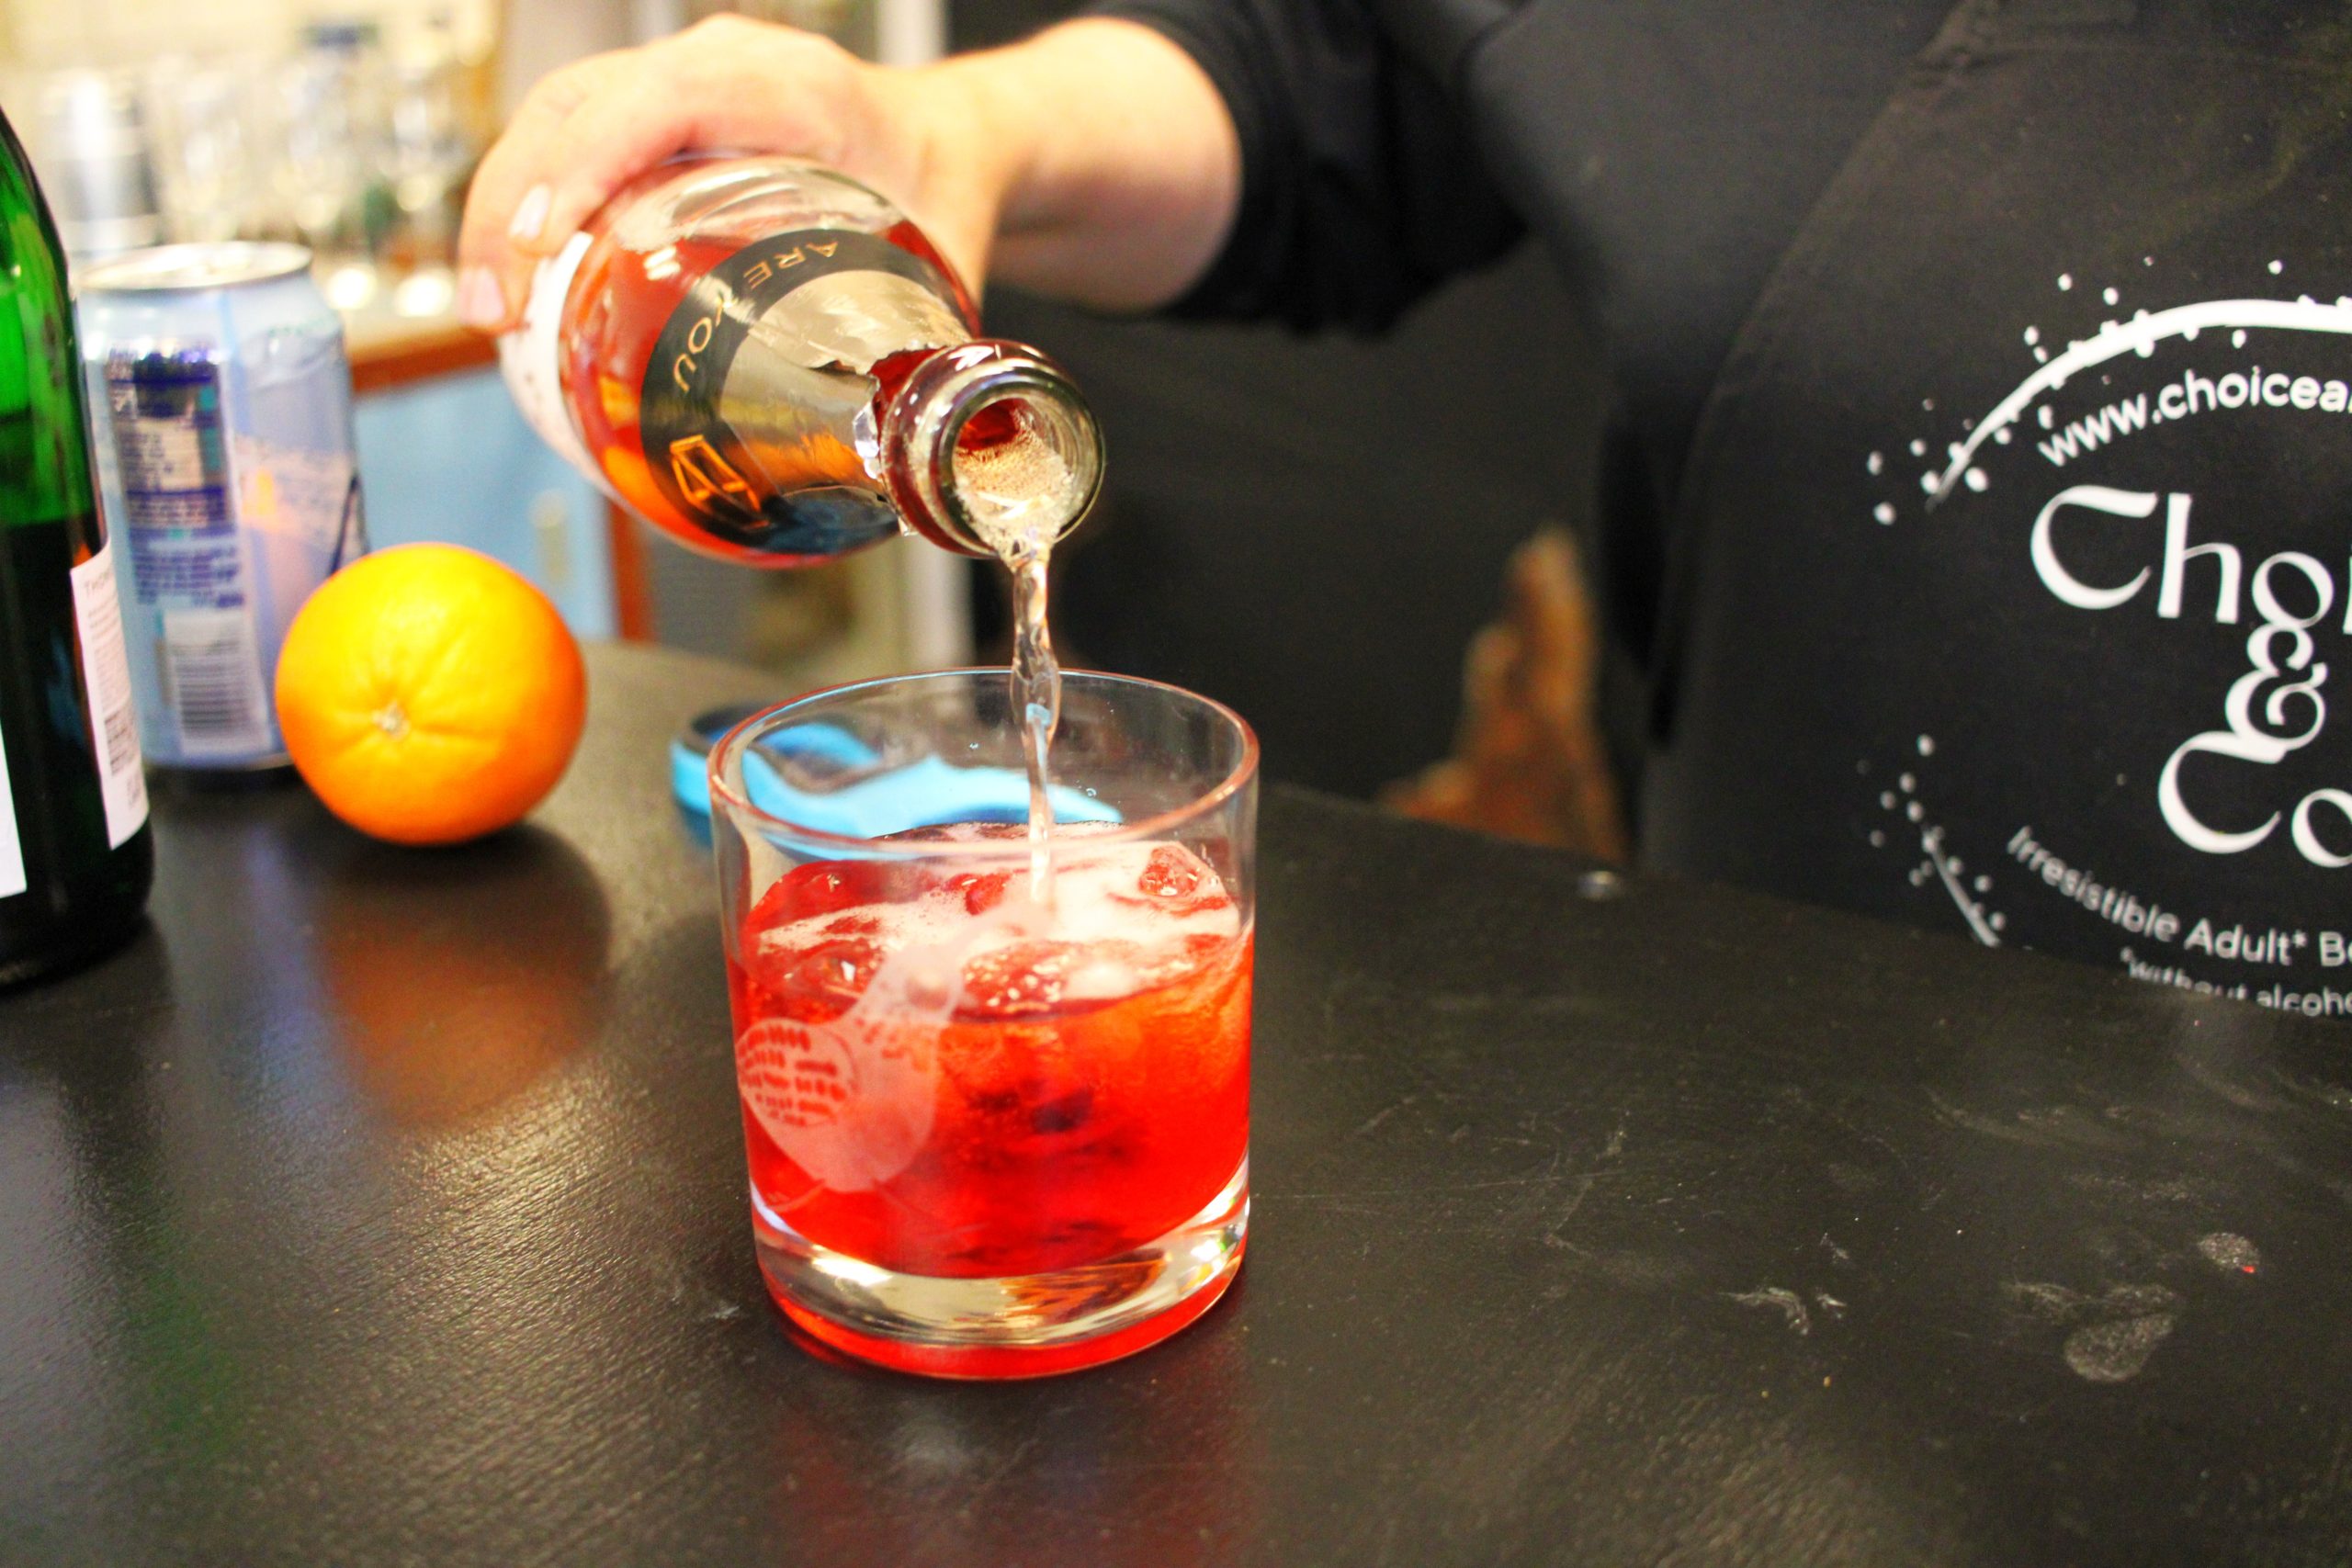 Mocktail at Choice & Co. (Photo by Mark Whittaker)